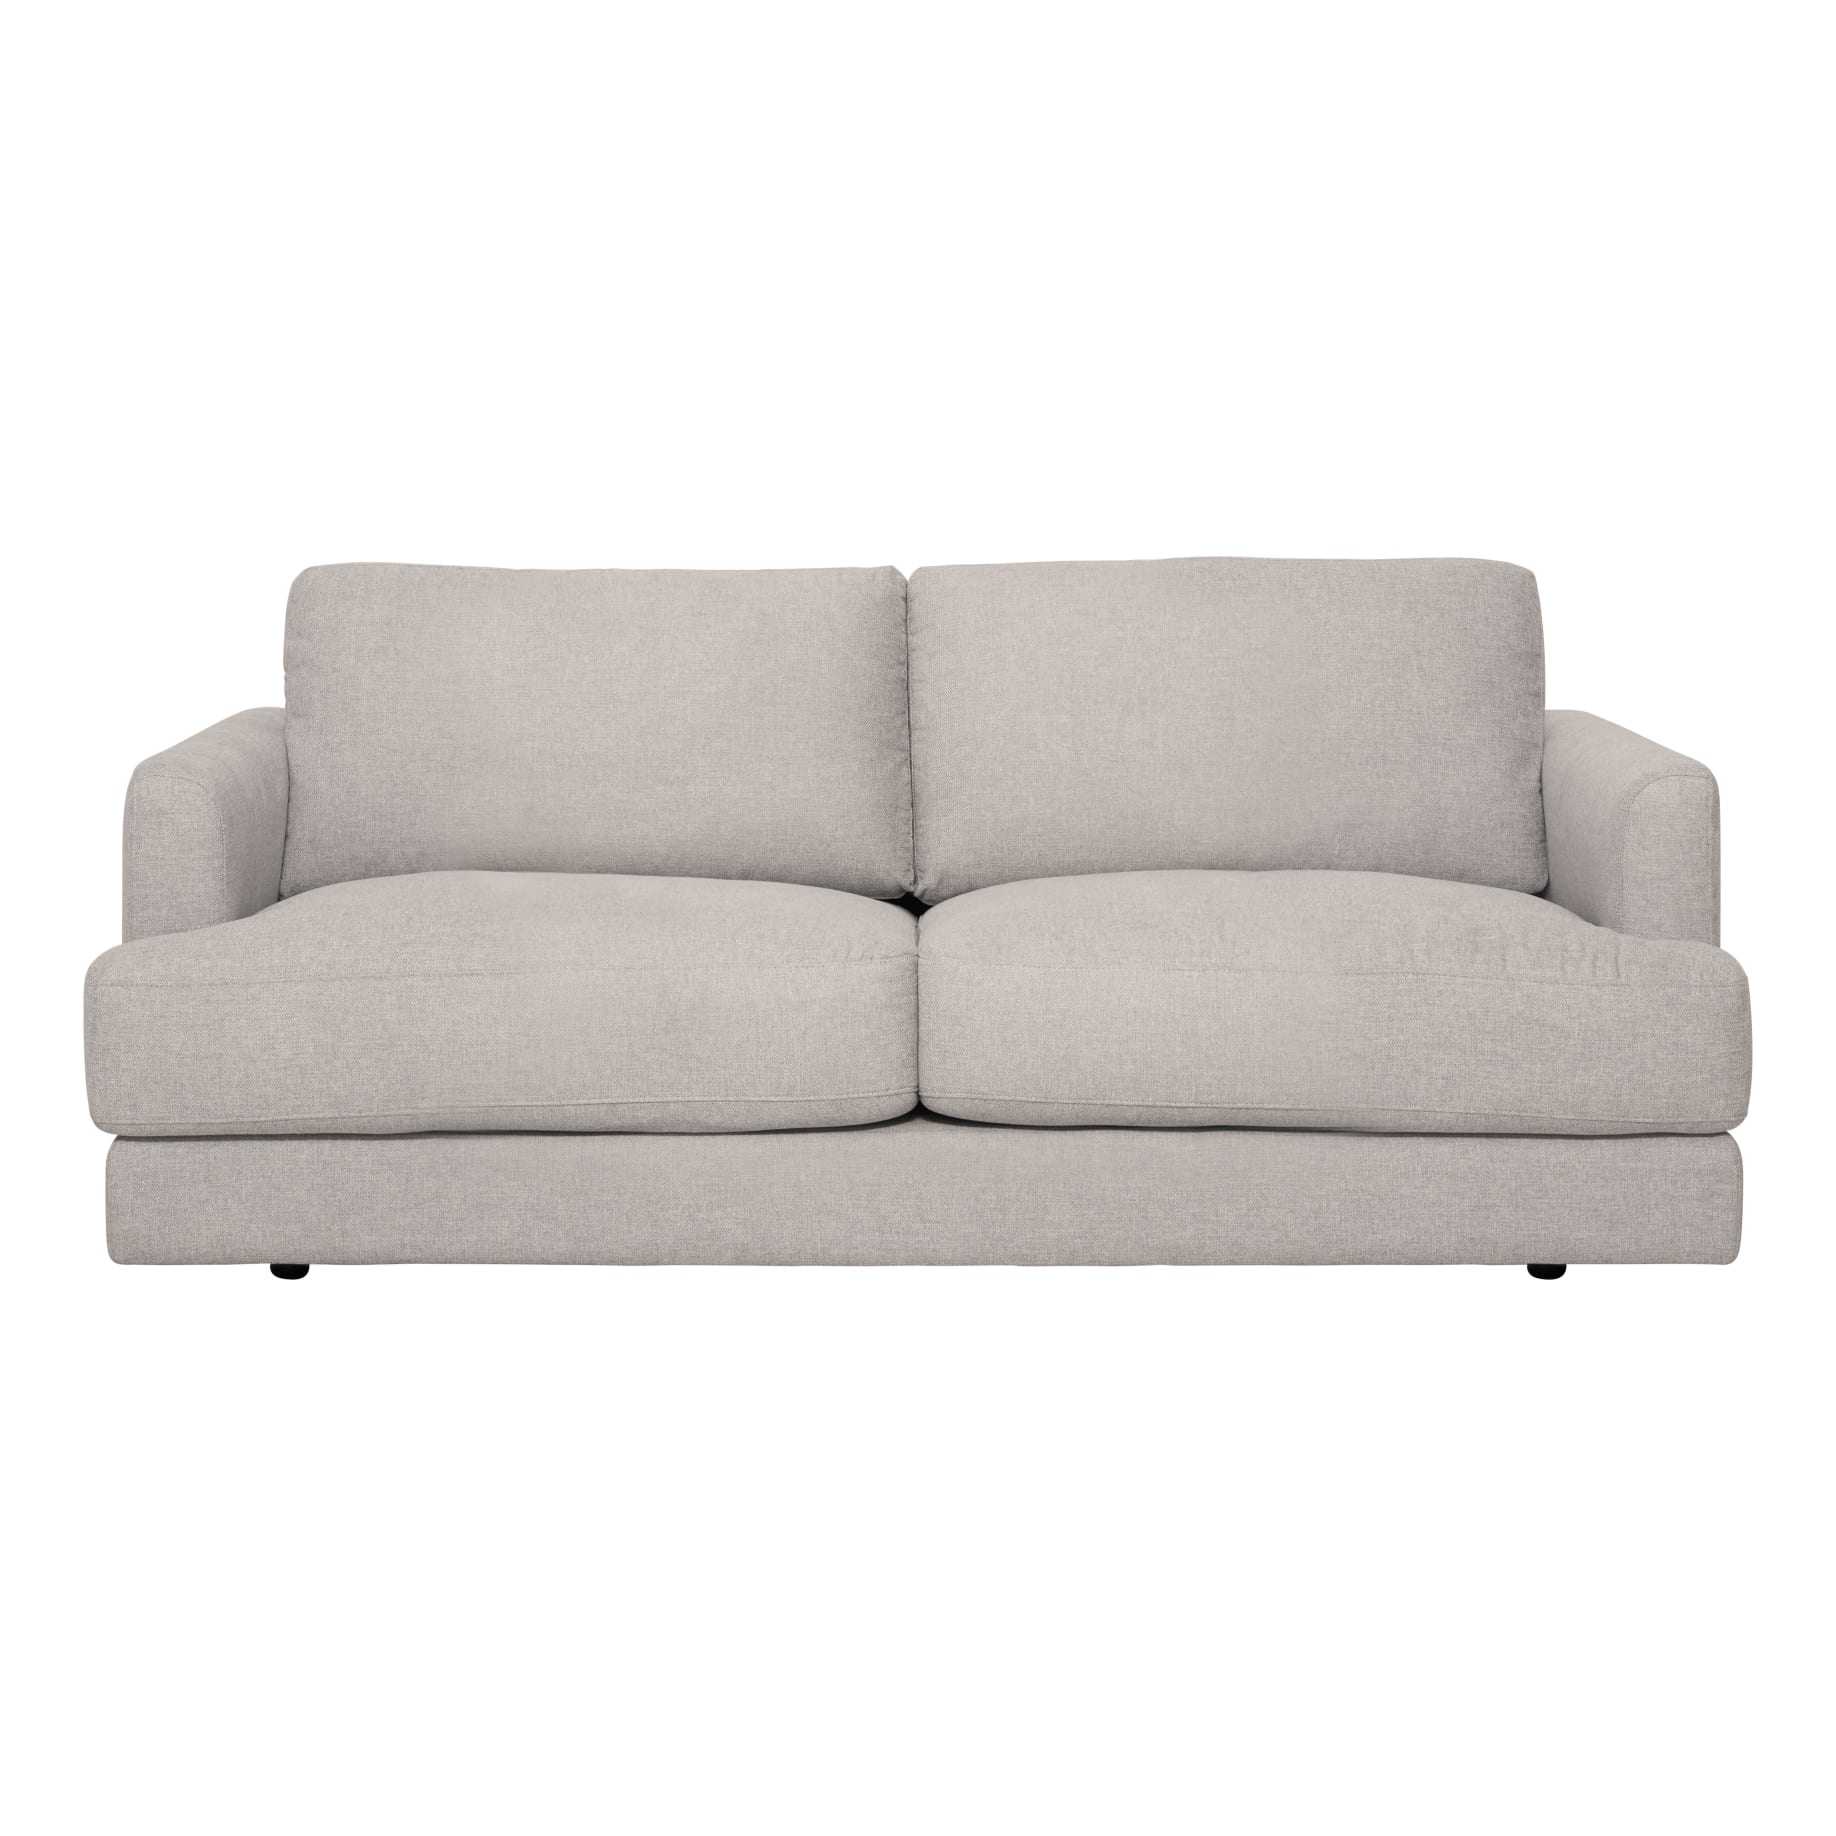 Temple 3 Seater with 2 Cushions in Belfast Beige